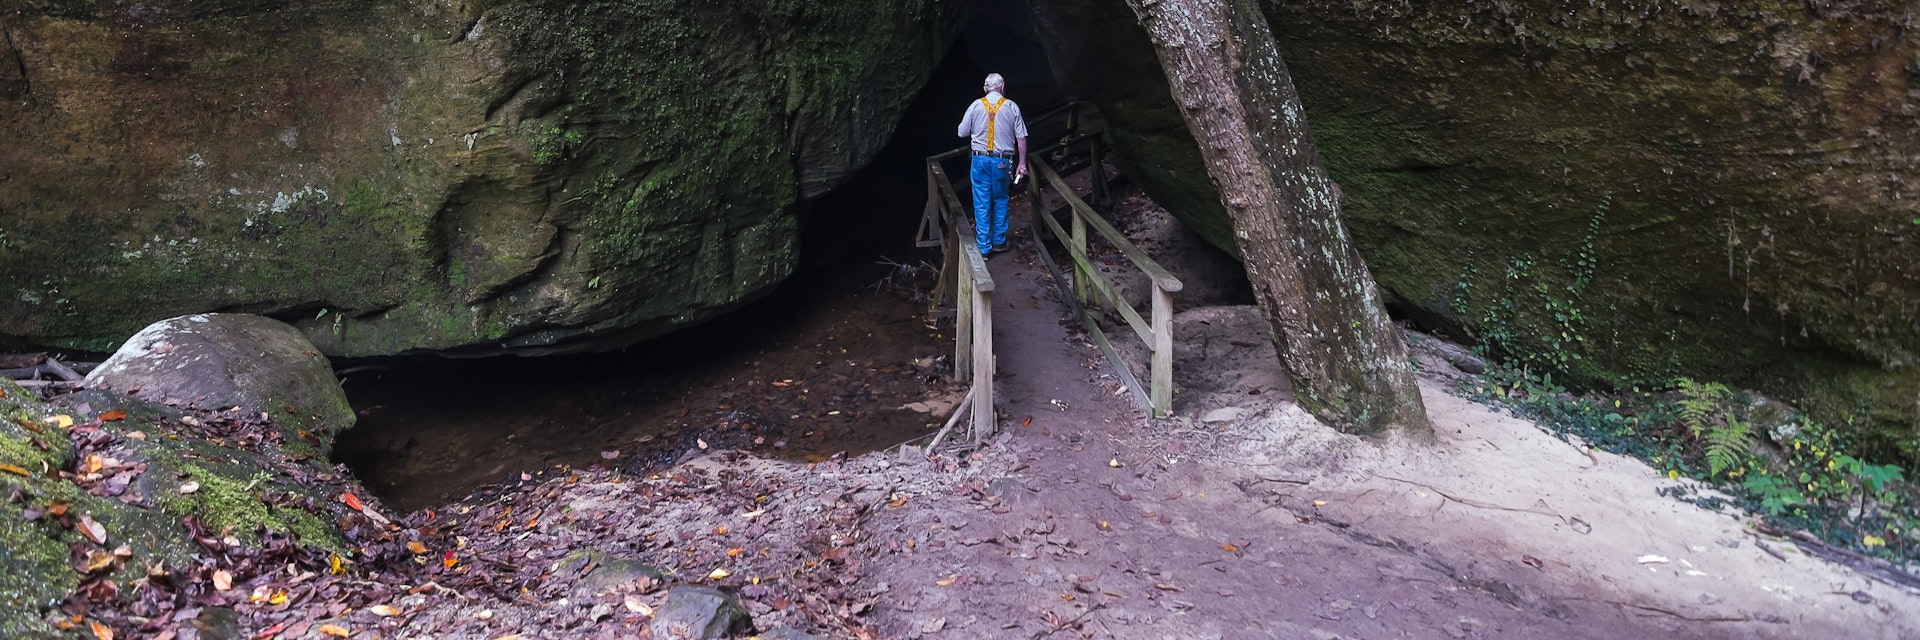 A man hiking at Dismals Canyon in Franklin County, Alabama.
M5RD2F
hiking, leisure, peaceful, rock, trail, tranquil, formations, outdoors, nature, walking, enjoying nature, one person, man